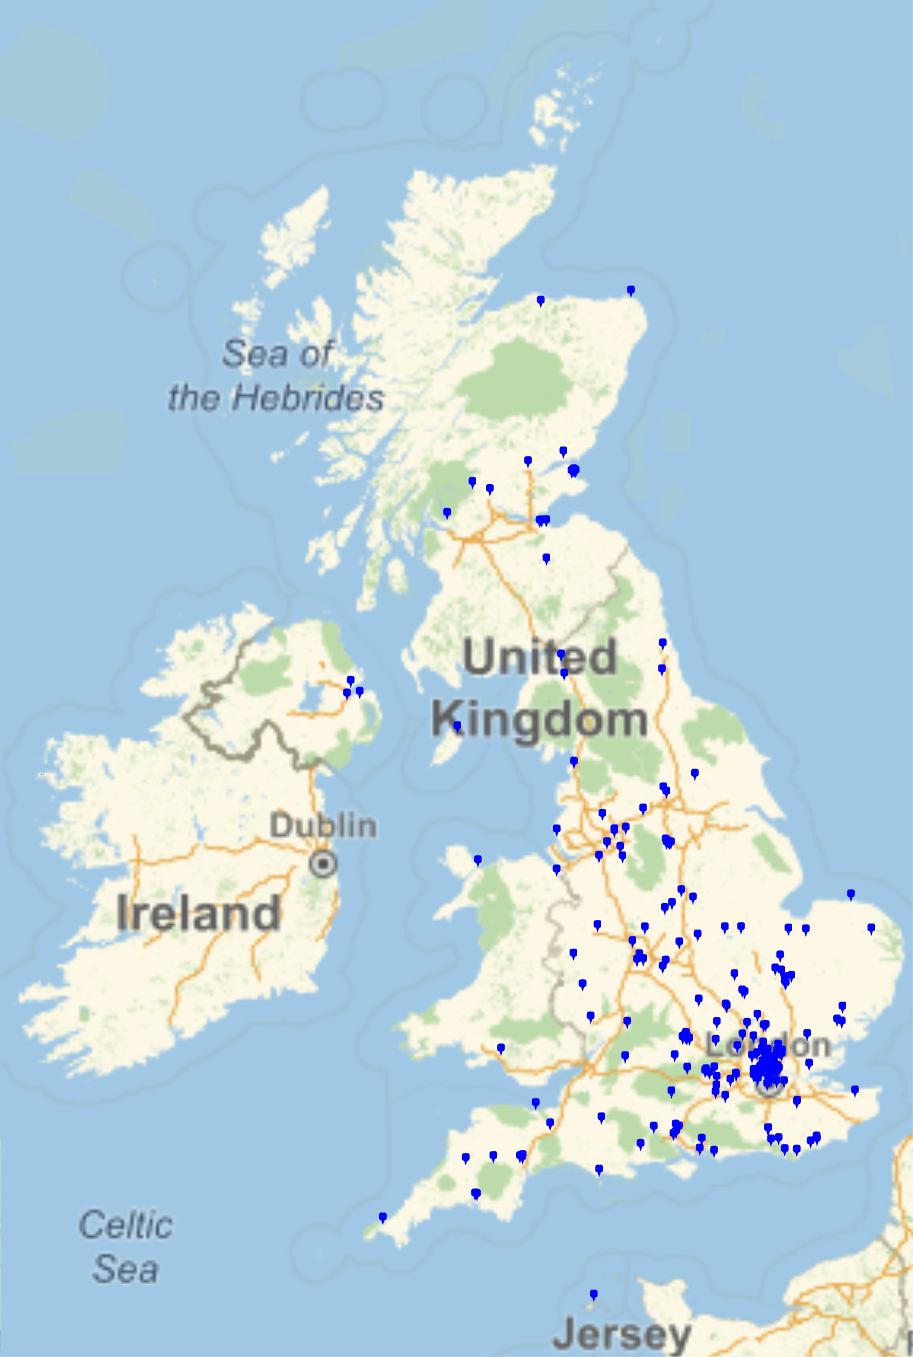 Map showing the distribution of BSHM members across the UK, showing concentration around London and scattered distribution elsewhere.